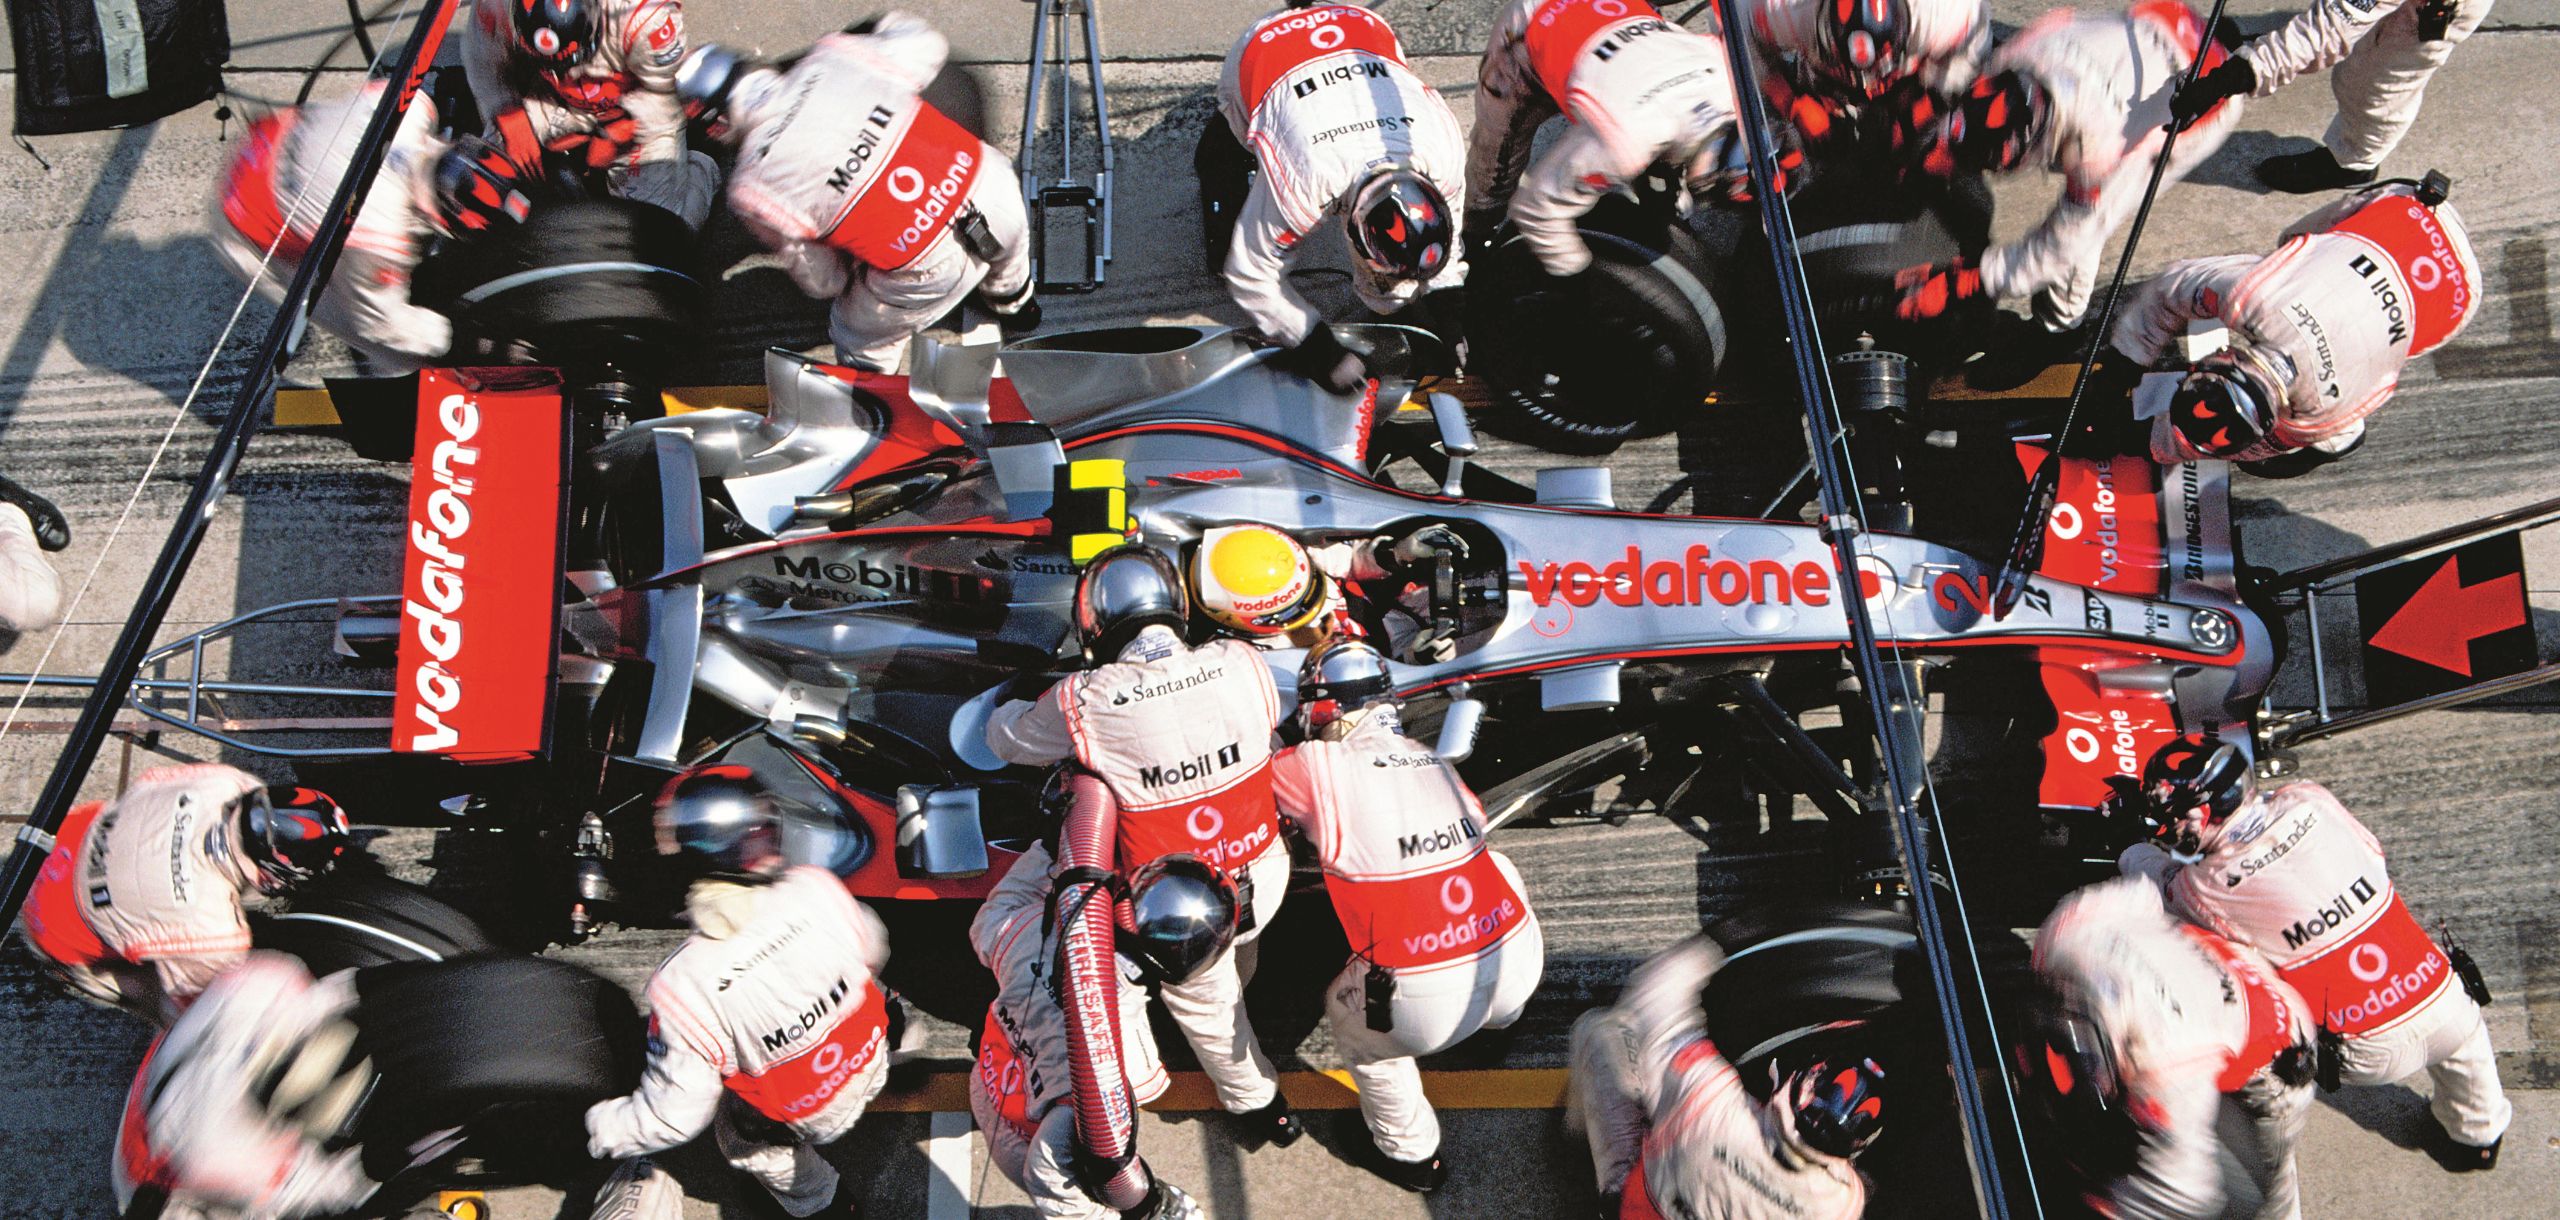 Portrait capturing a pit stop during the 2007 Malaysian Grand Prix. Photography by Darren Heath